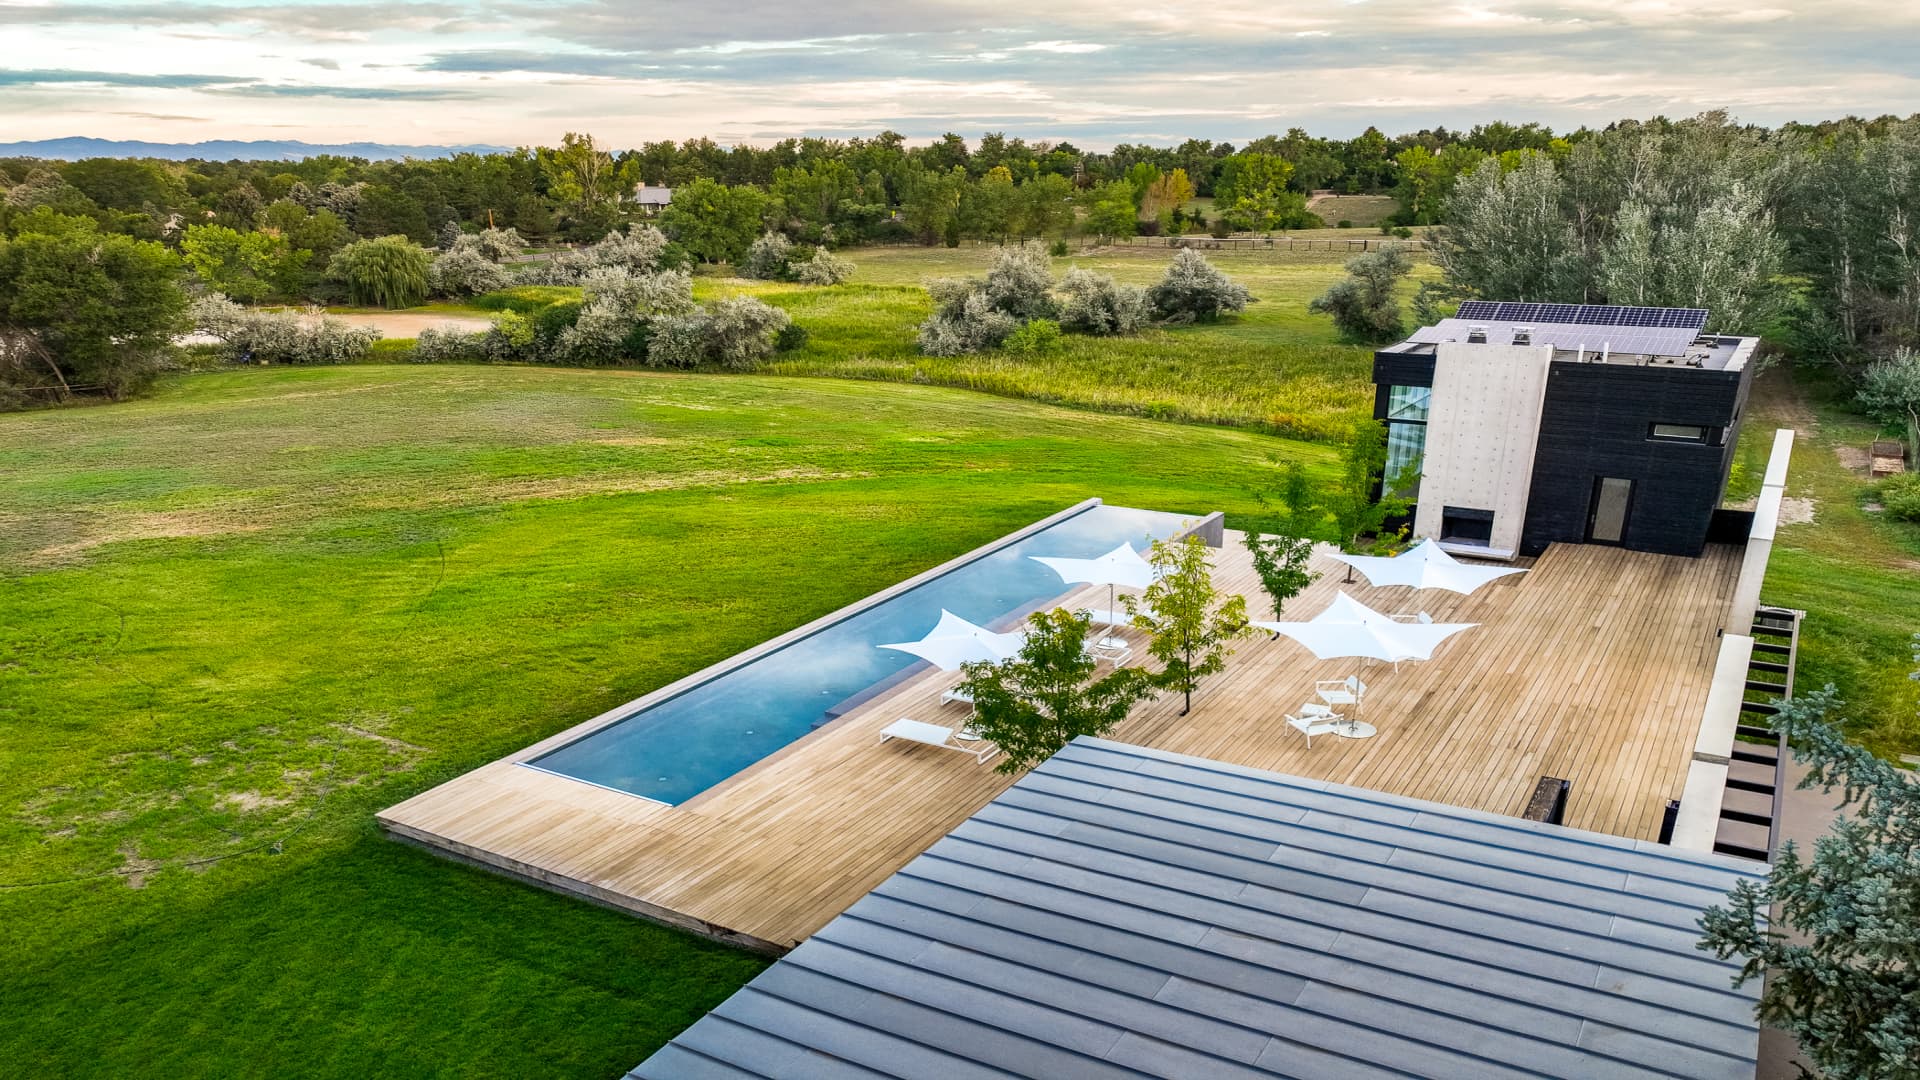 The pool and sundeck offer a view of the estate's rolling green acreage.